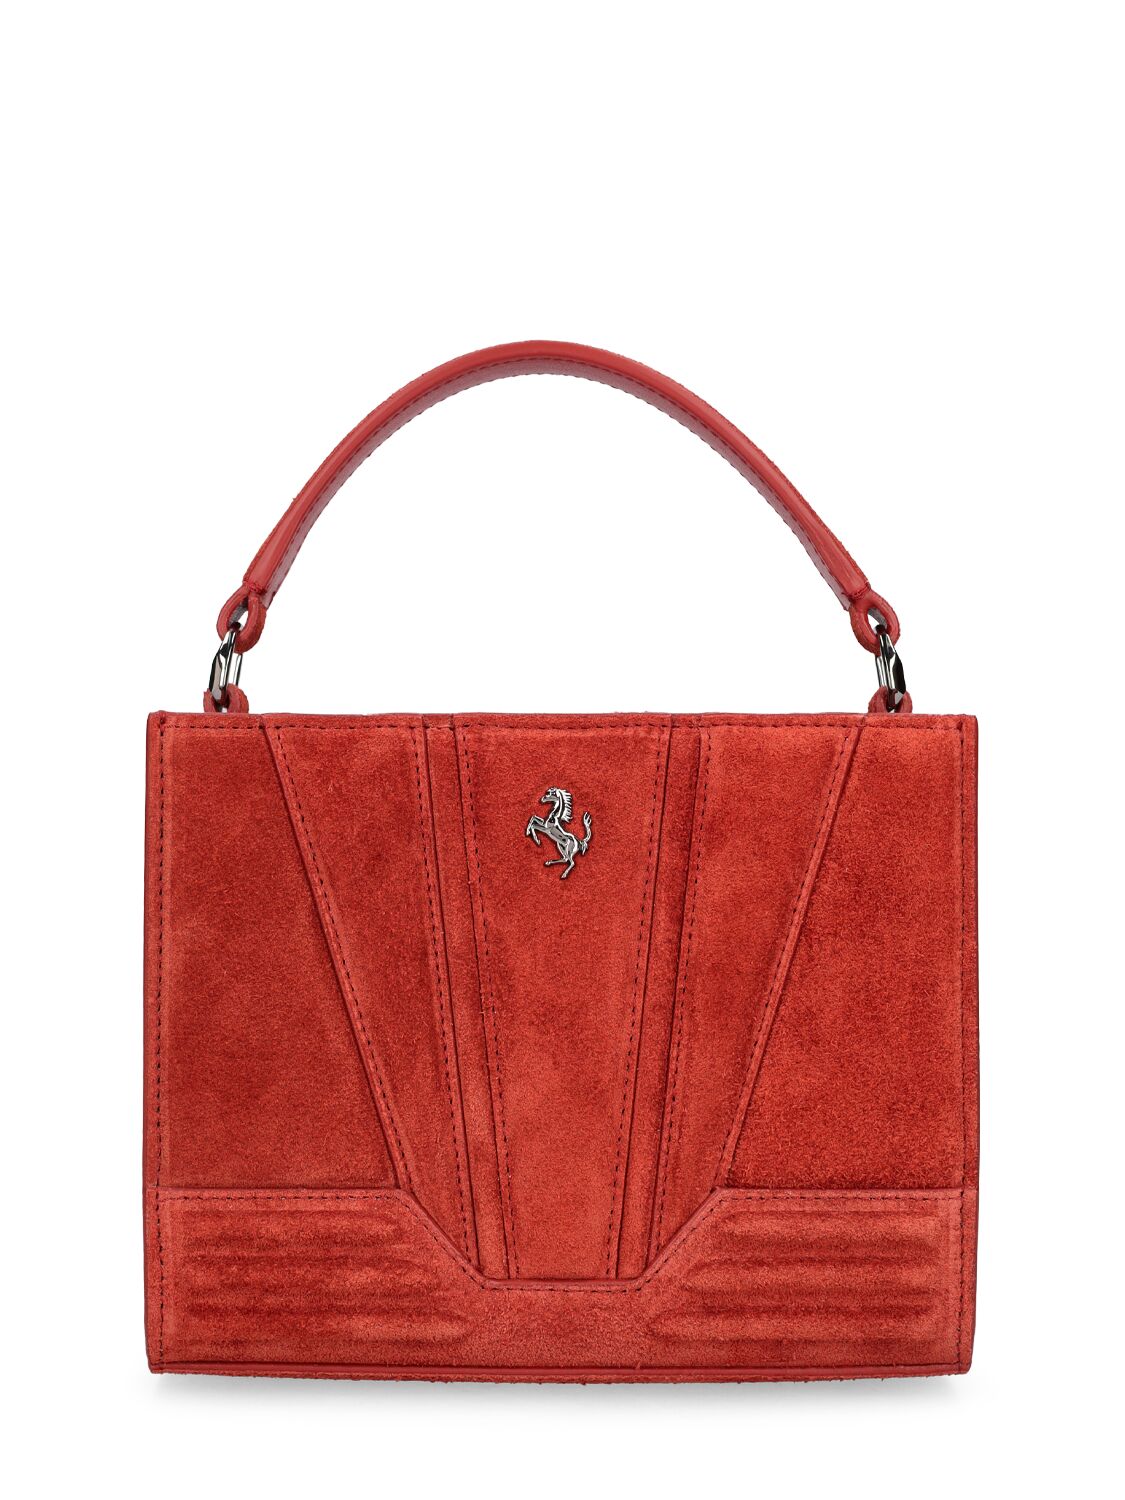 Image of Micro Suede Leather Tote Bag